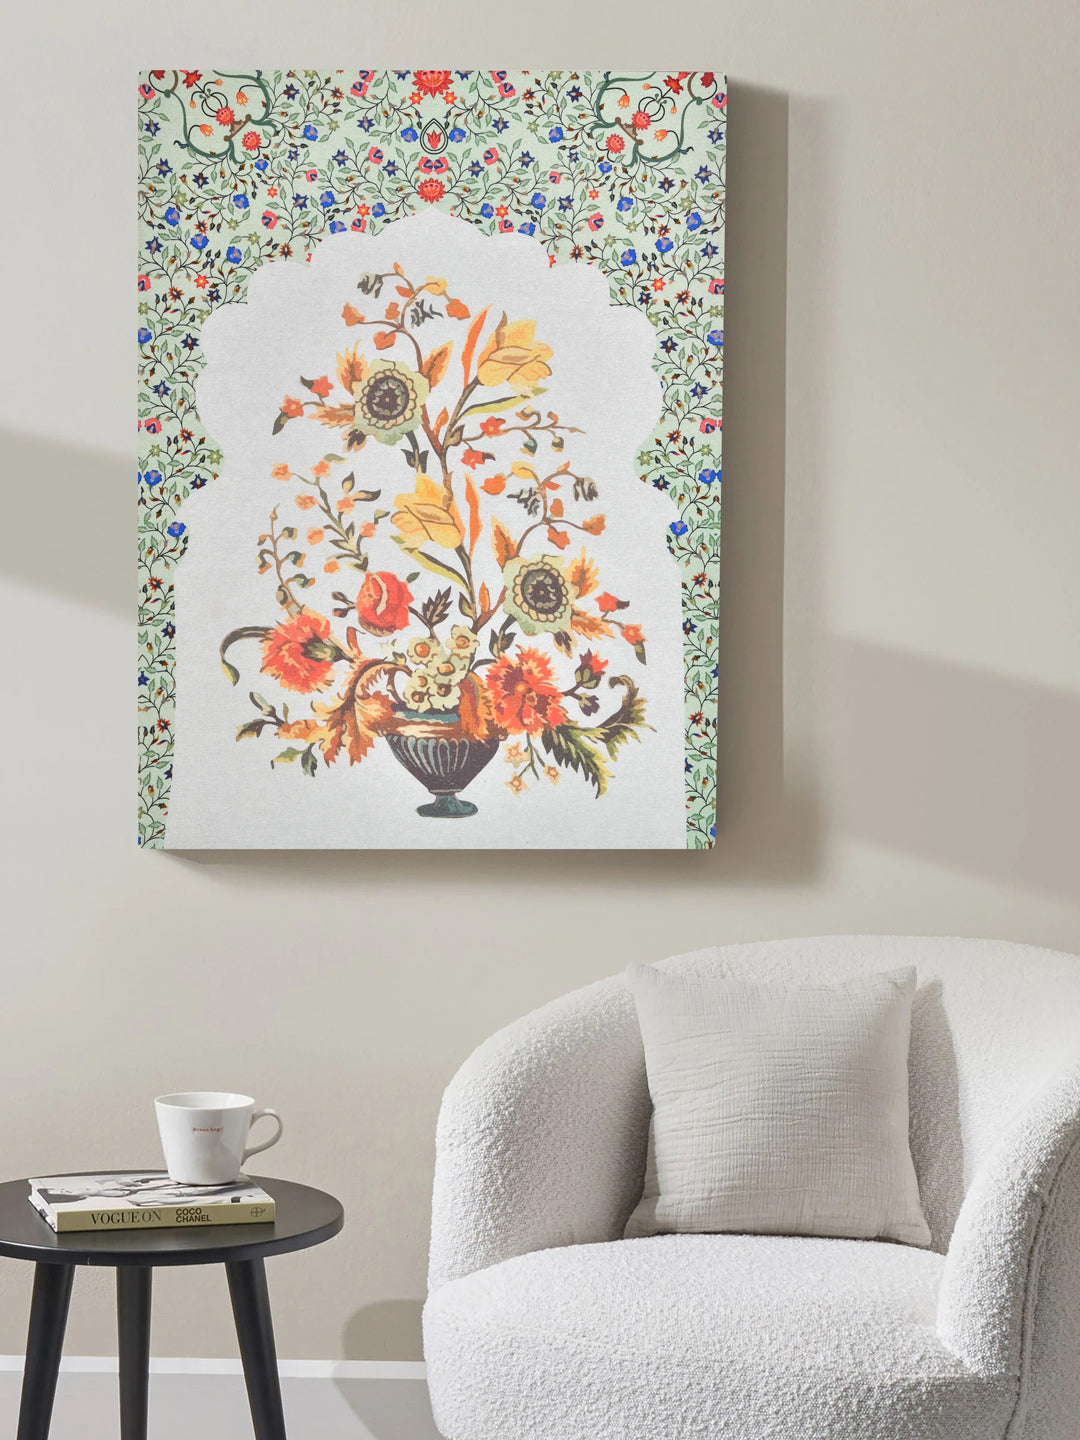 Mughal Floral Painted Wall Art